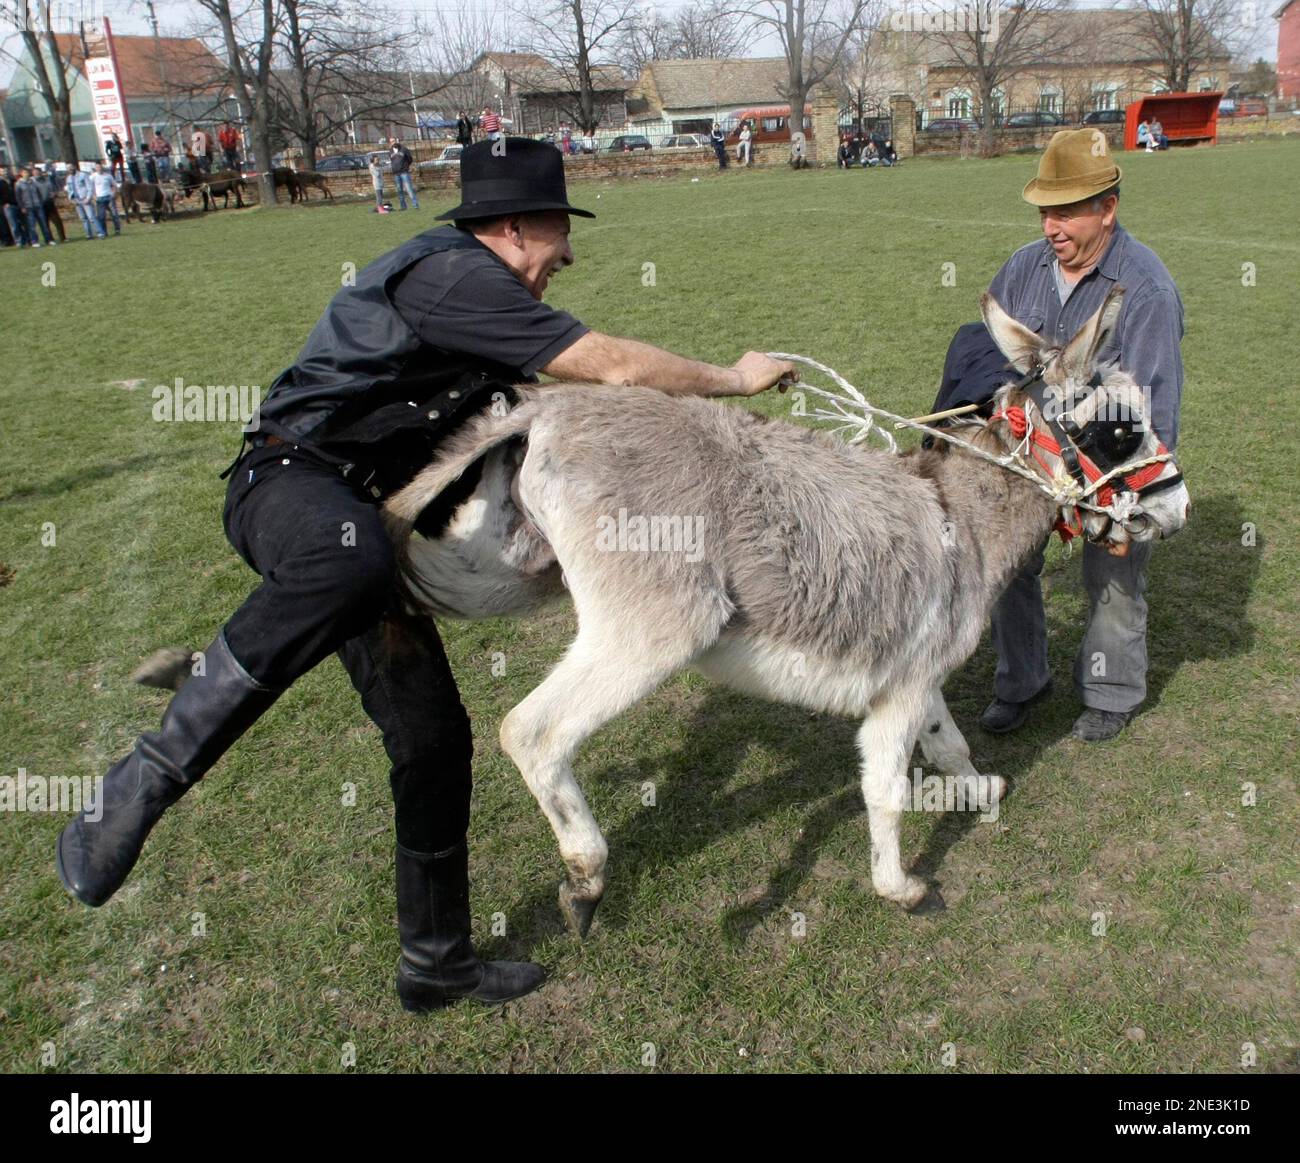 An unidentified man falls from off the back of his donkey as the animal to kick him, during the traditional Donkey Race in village of Sakule, 30 kilometers northwest of Belgrade, Serbia, Sunday, March 20, 2010. (AP Photo/Darko Vojinovic) Stock Photo